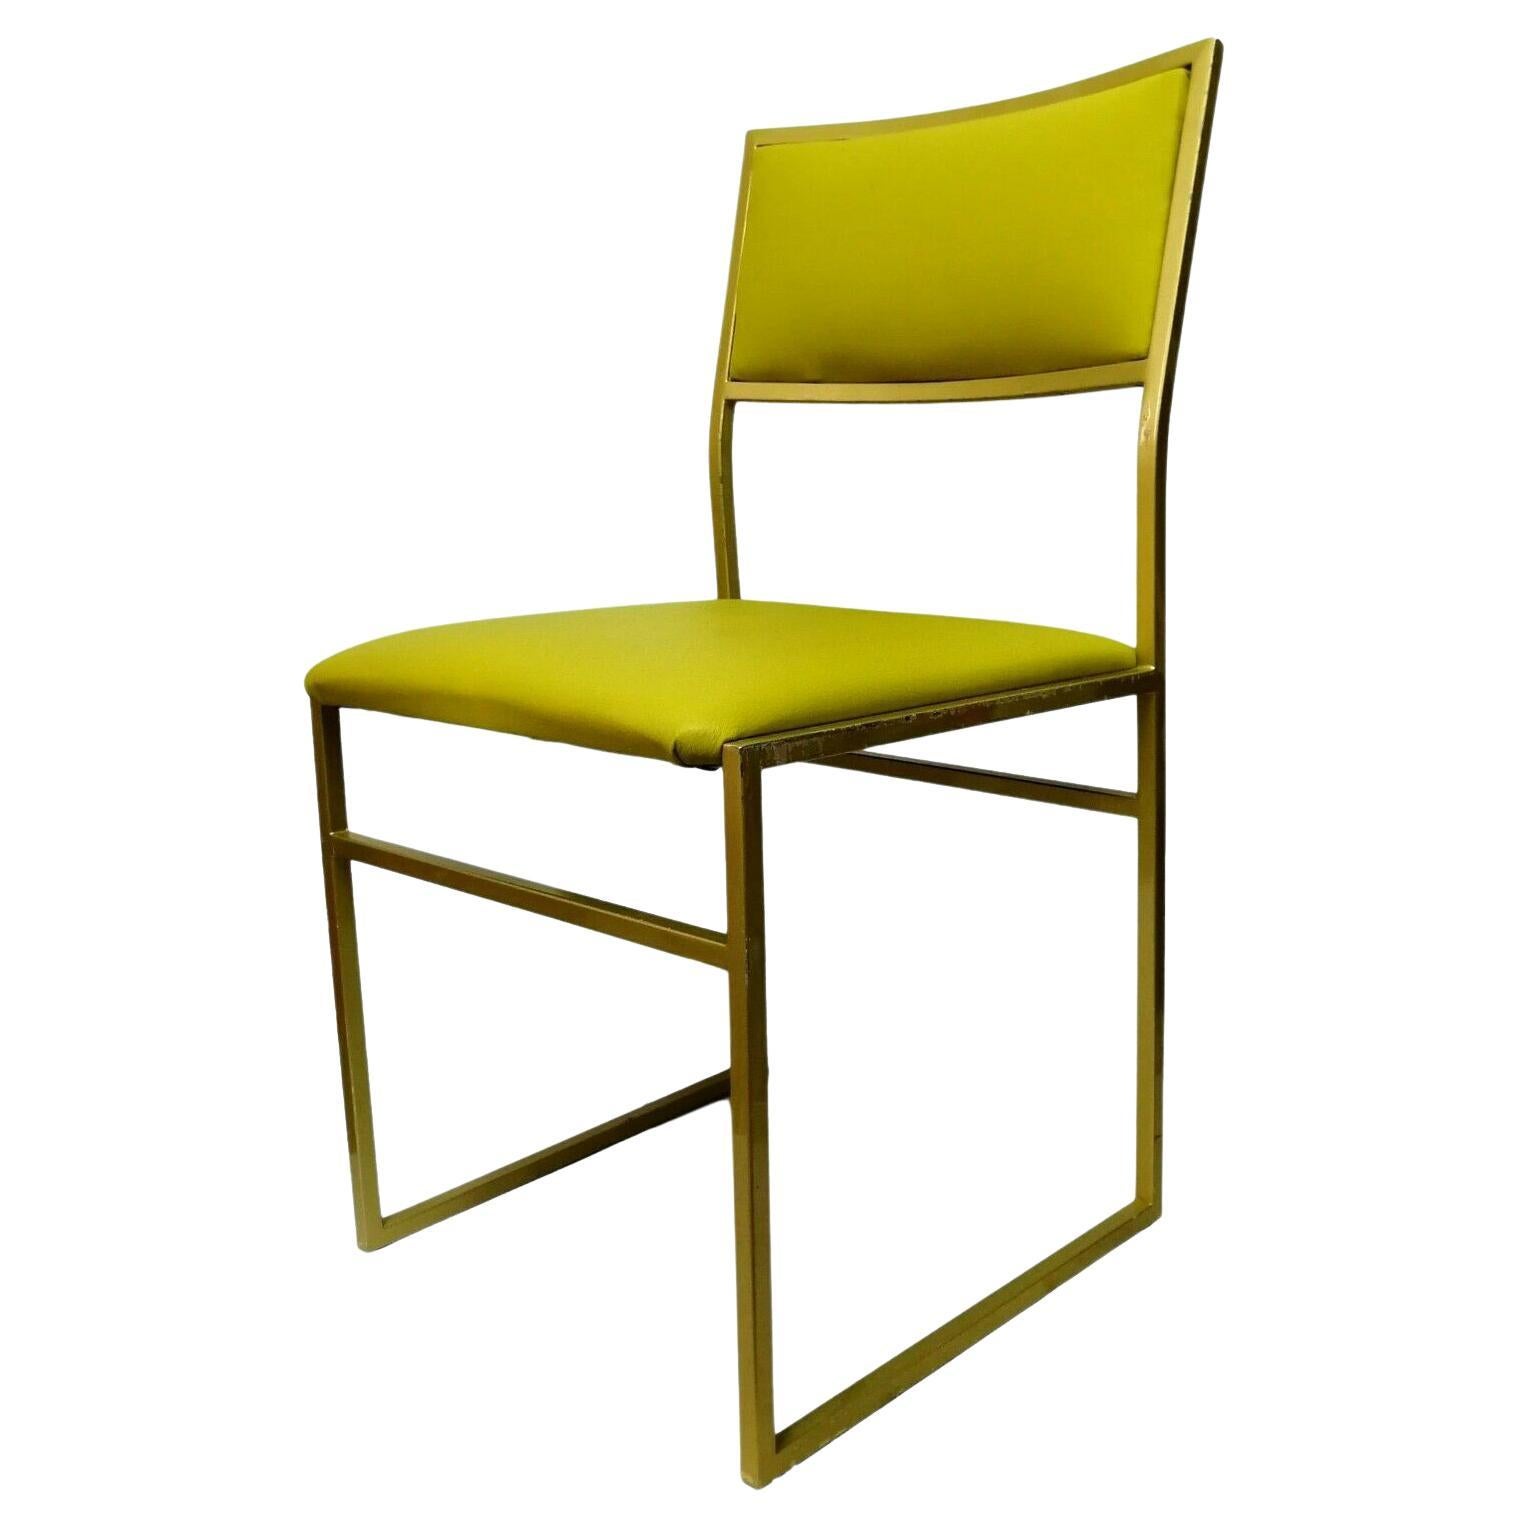 Collectible Chair in Gold Metal and Acid Green Upholstery, 1970s